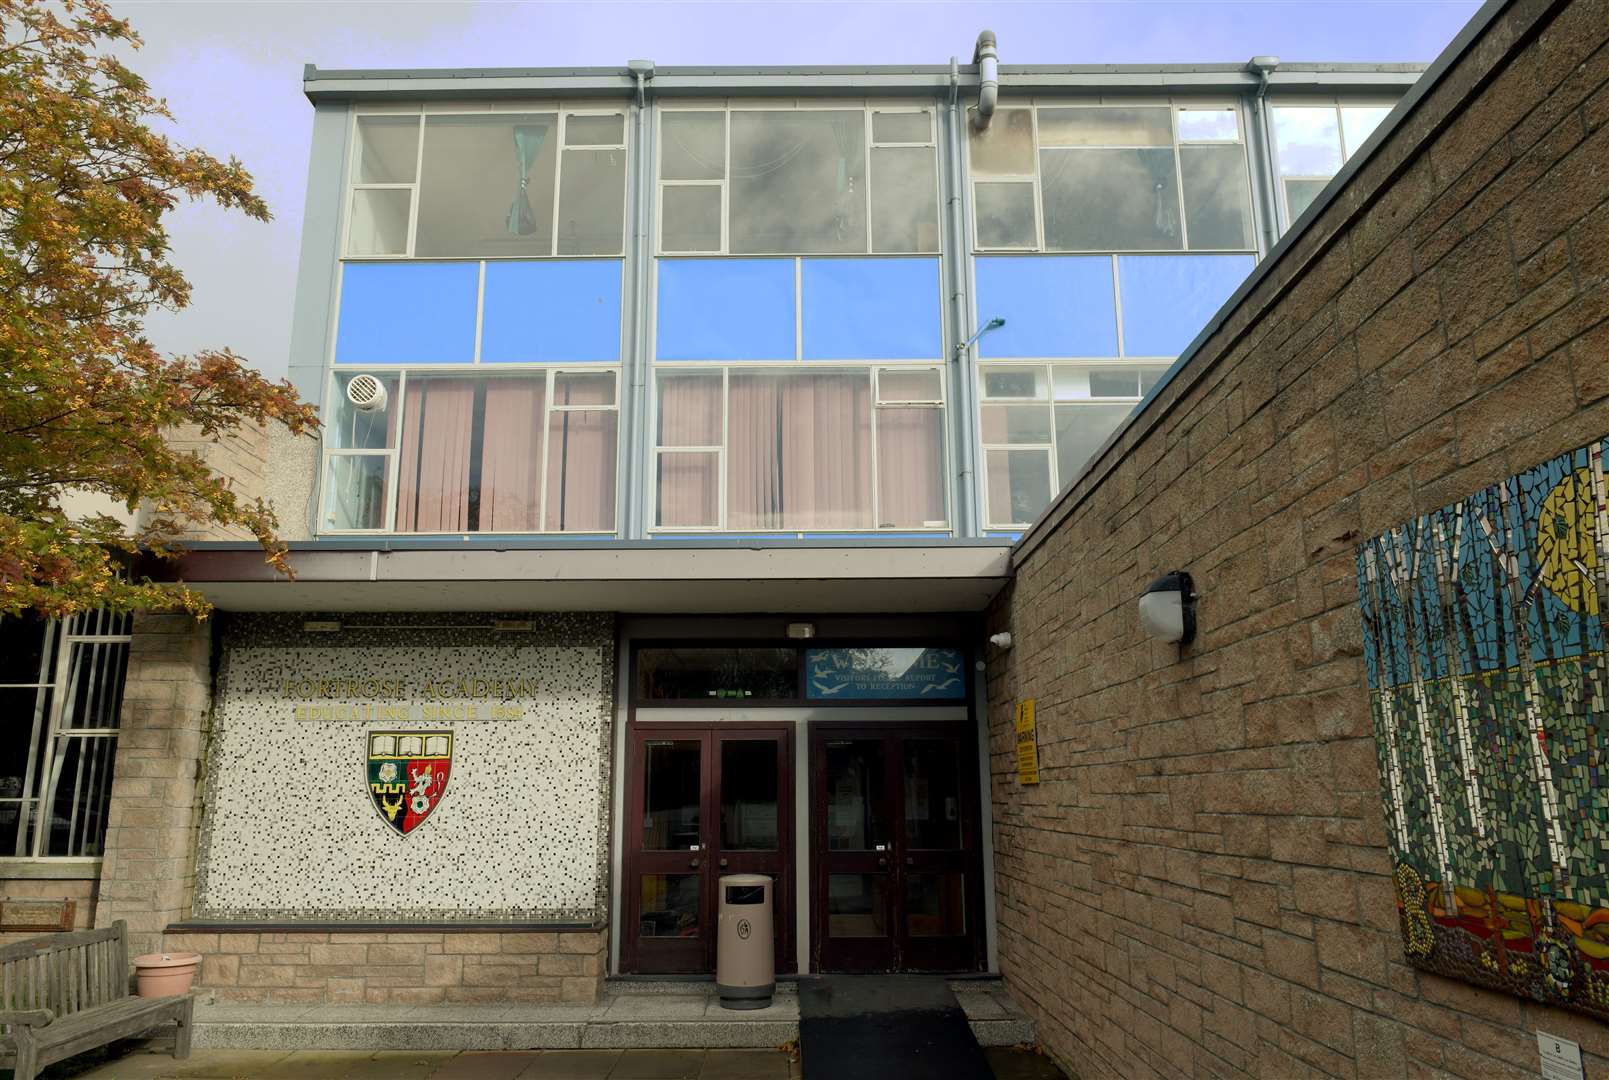 Fortrose Academy was evacuated following a malicious call.